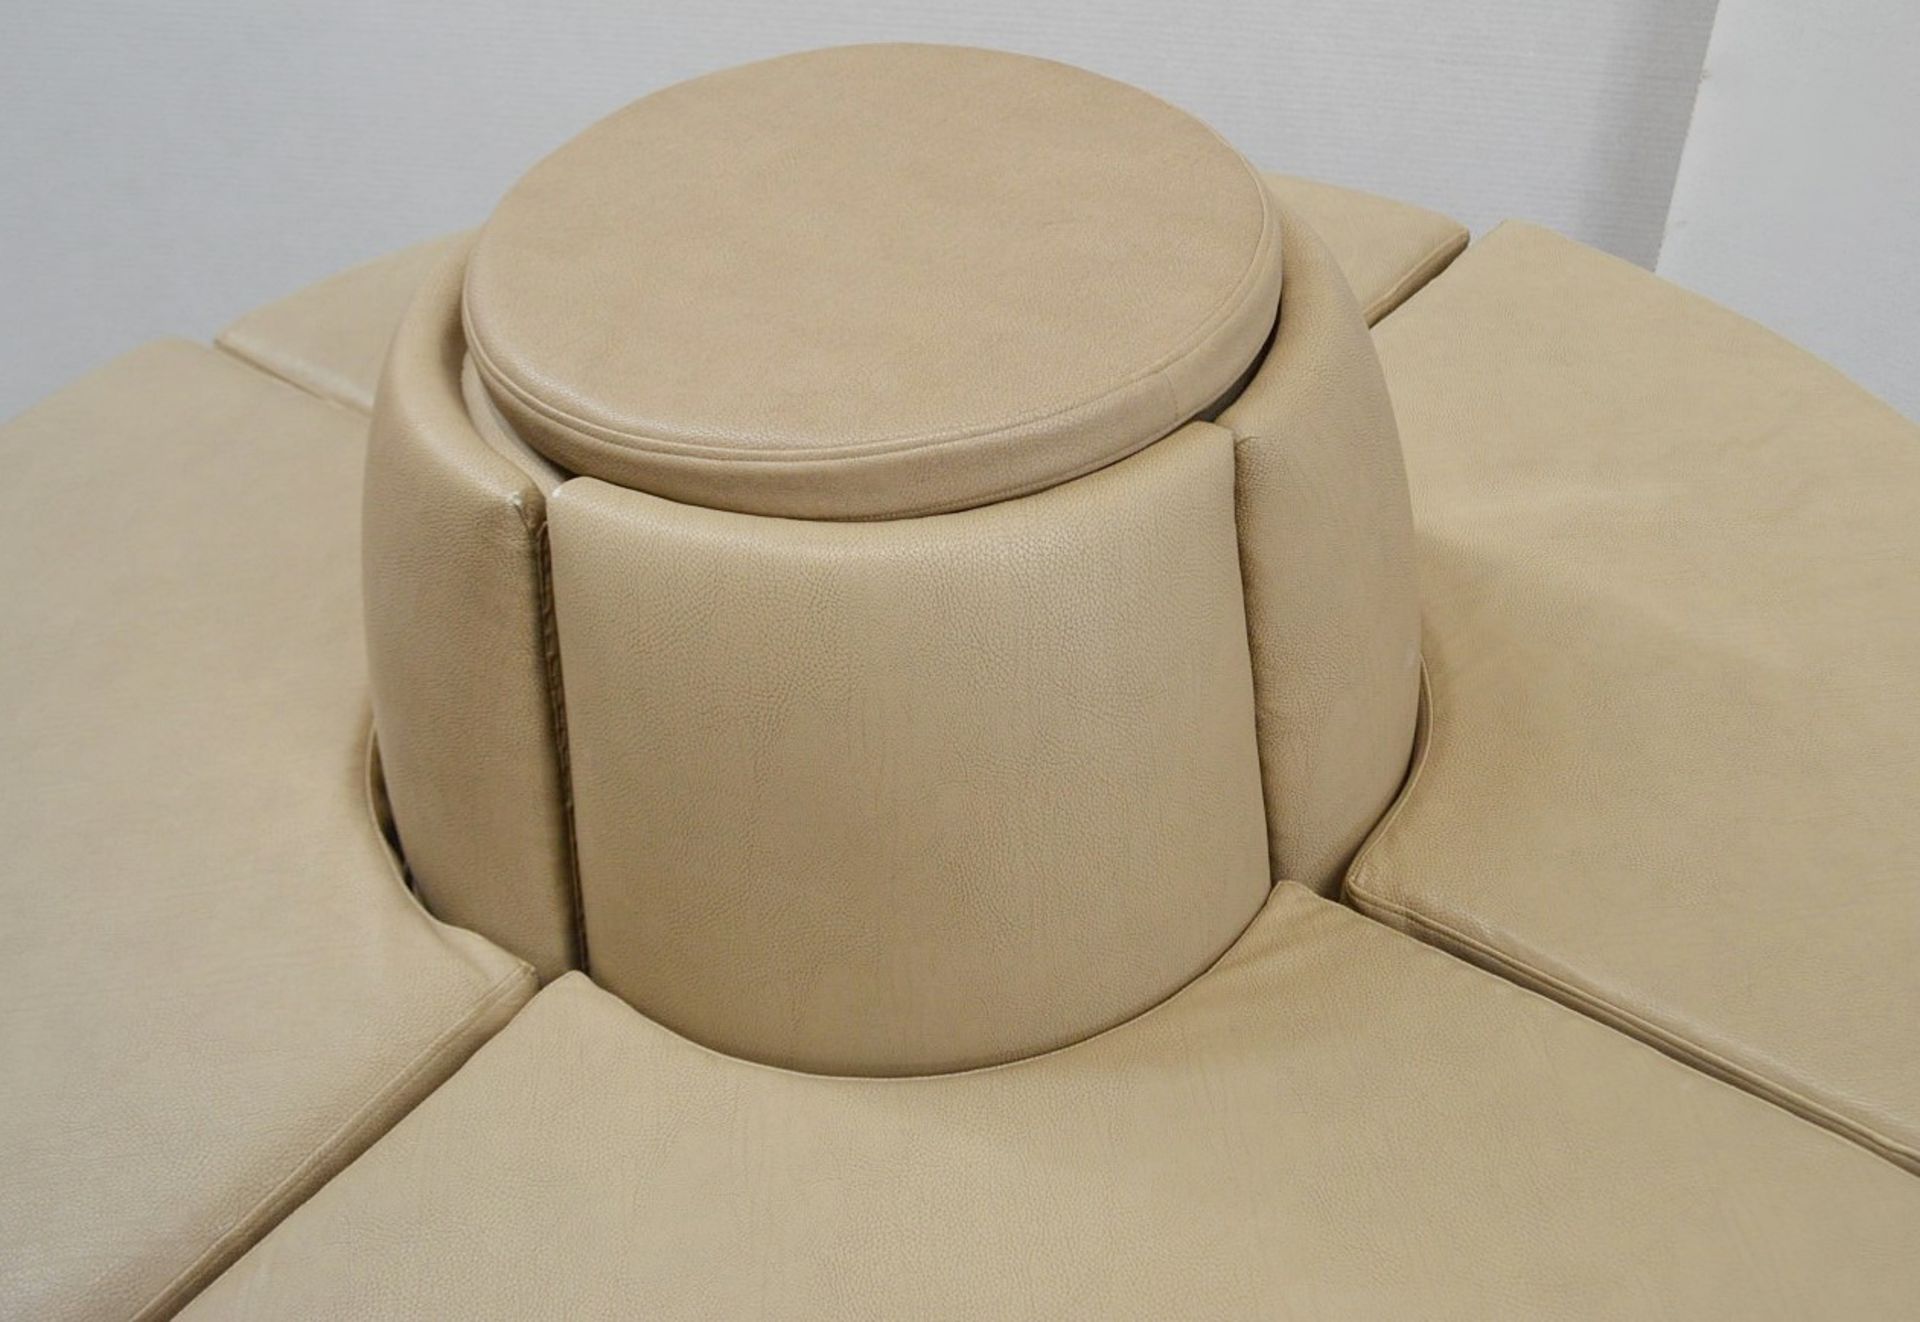 1 x Circular 4-Section Banquet Seating, Upholstered In A Premium Mocha Coloured Faux Leather - Image 2 of 10